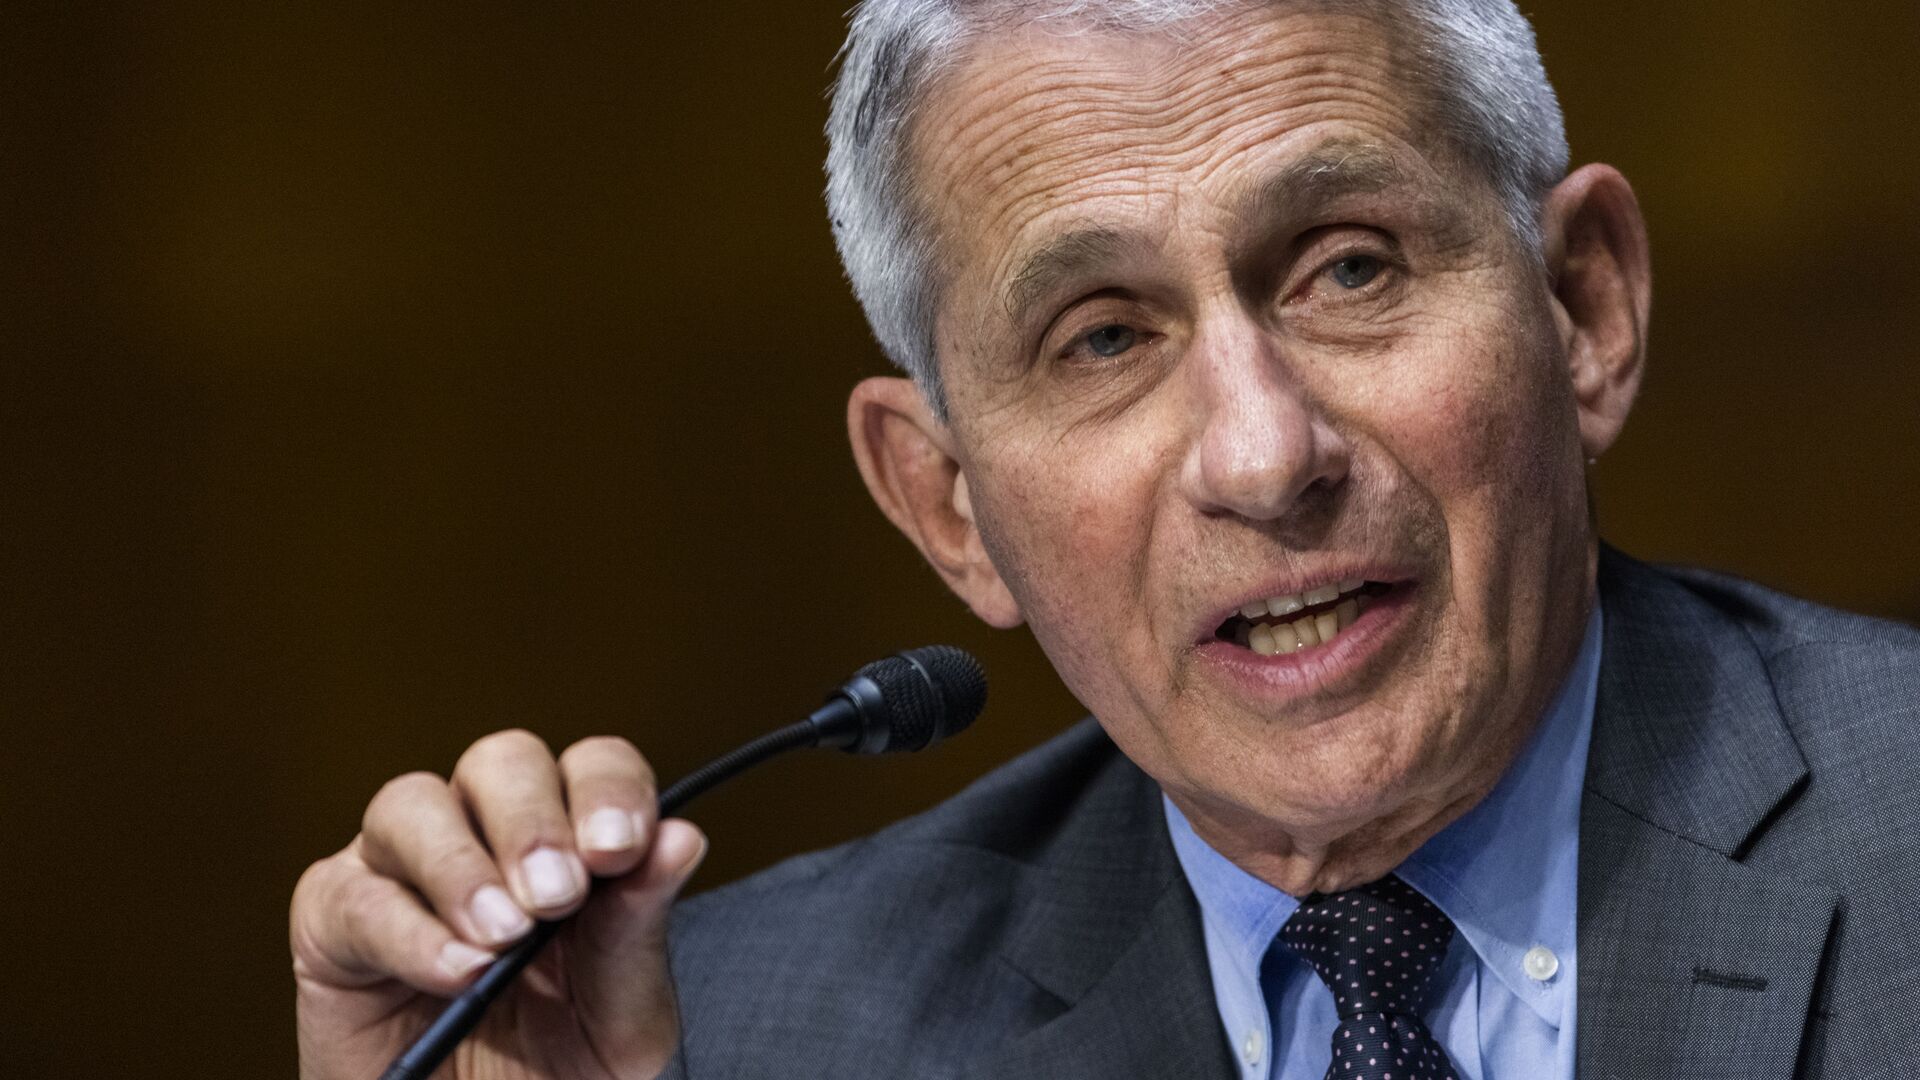 In this May 11, 2021, file photo, Dr. Anthony Fauci, director of the National Institute of Allergy and Infectious Diseases, speaks during hearing on Capitol Hill in Washington - Sputnik International, 1920, 09.02.2022